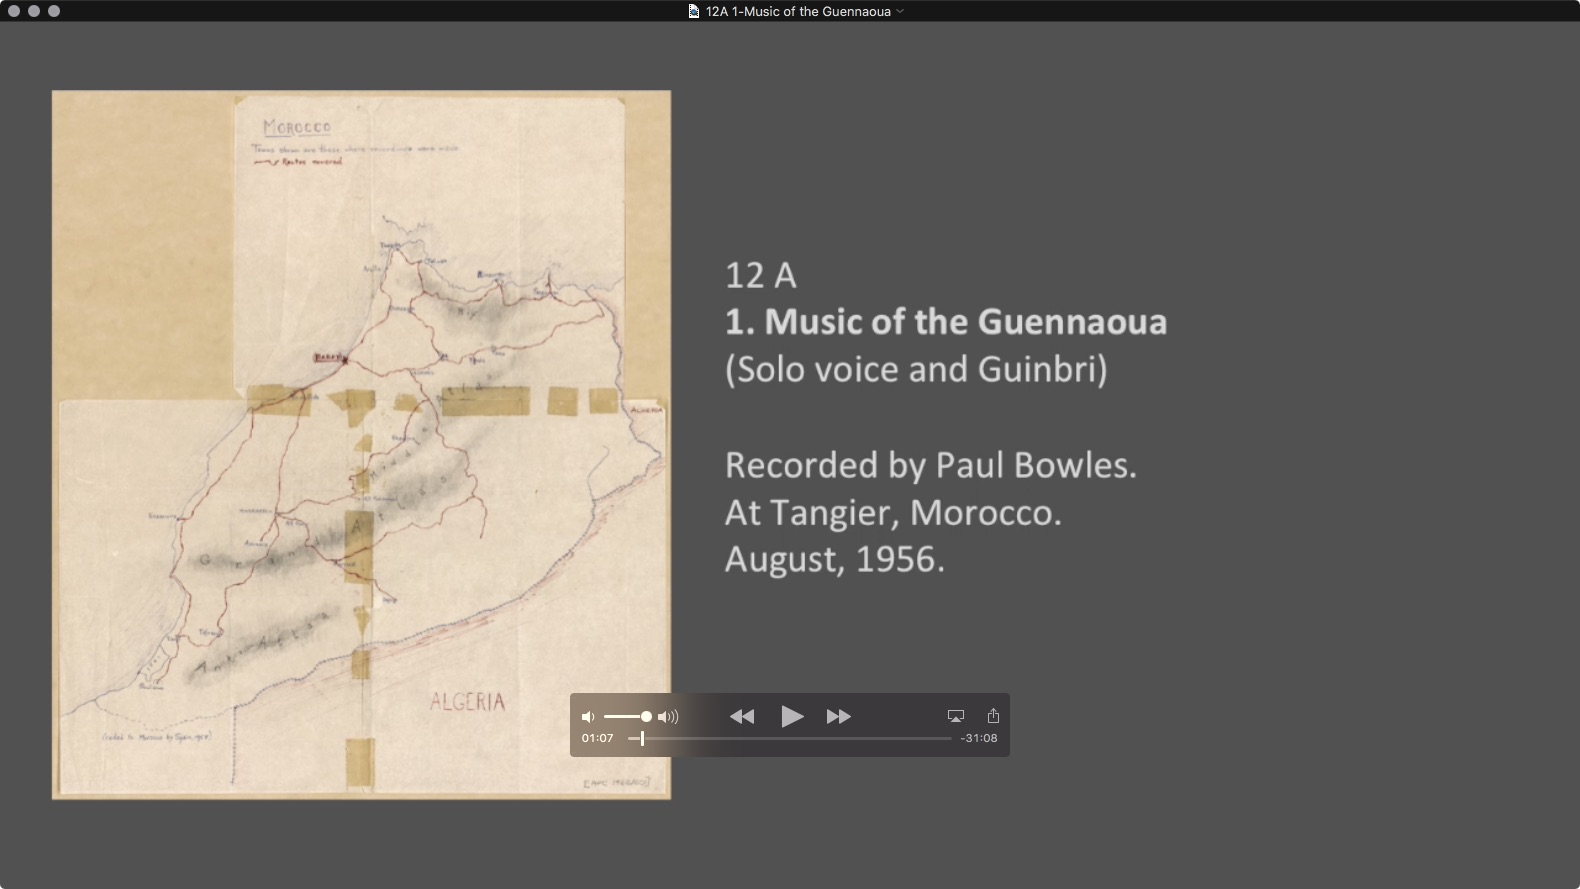  Tangier - 12 A
1. Music of the Guennaoua
(Solo voice and Guinbri)
Recorded by Paul Bowles.
At Tangier, Morocco.
August, 1956.
